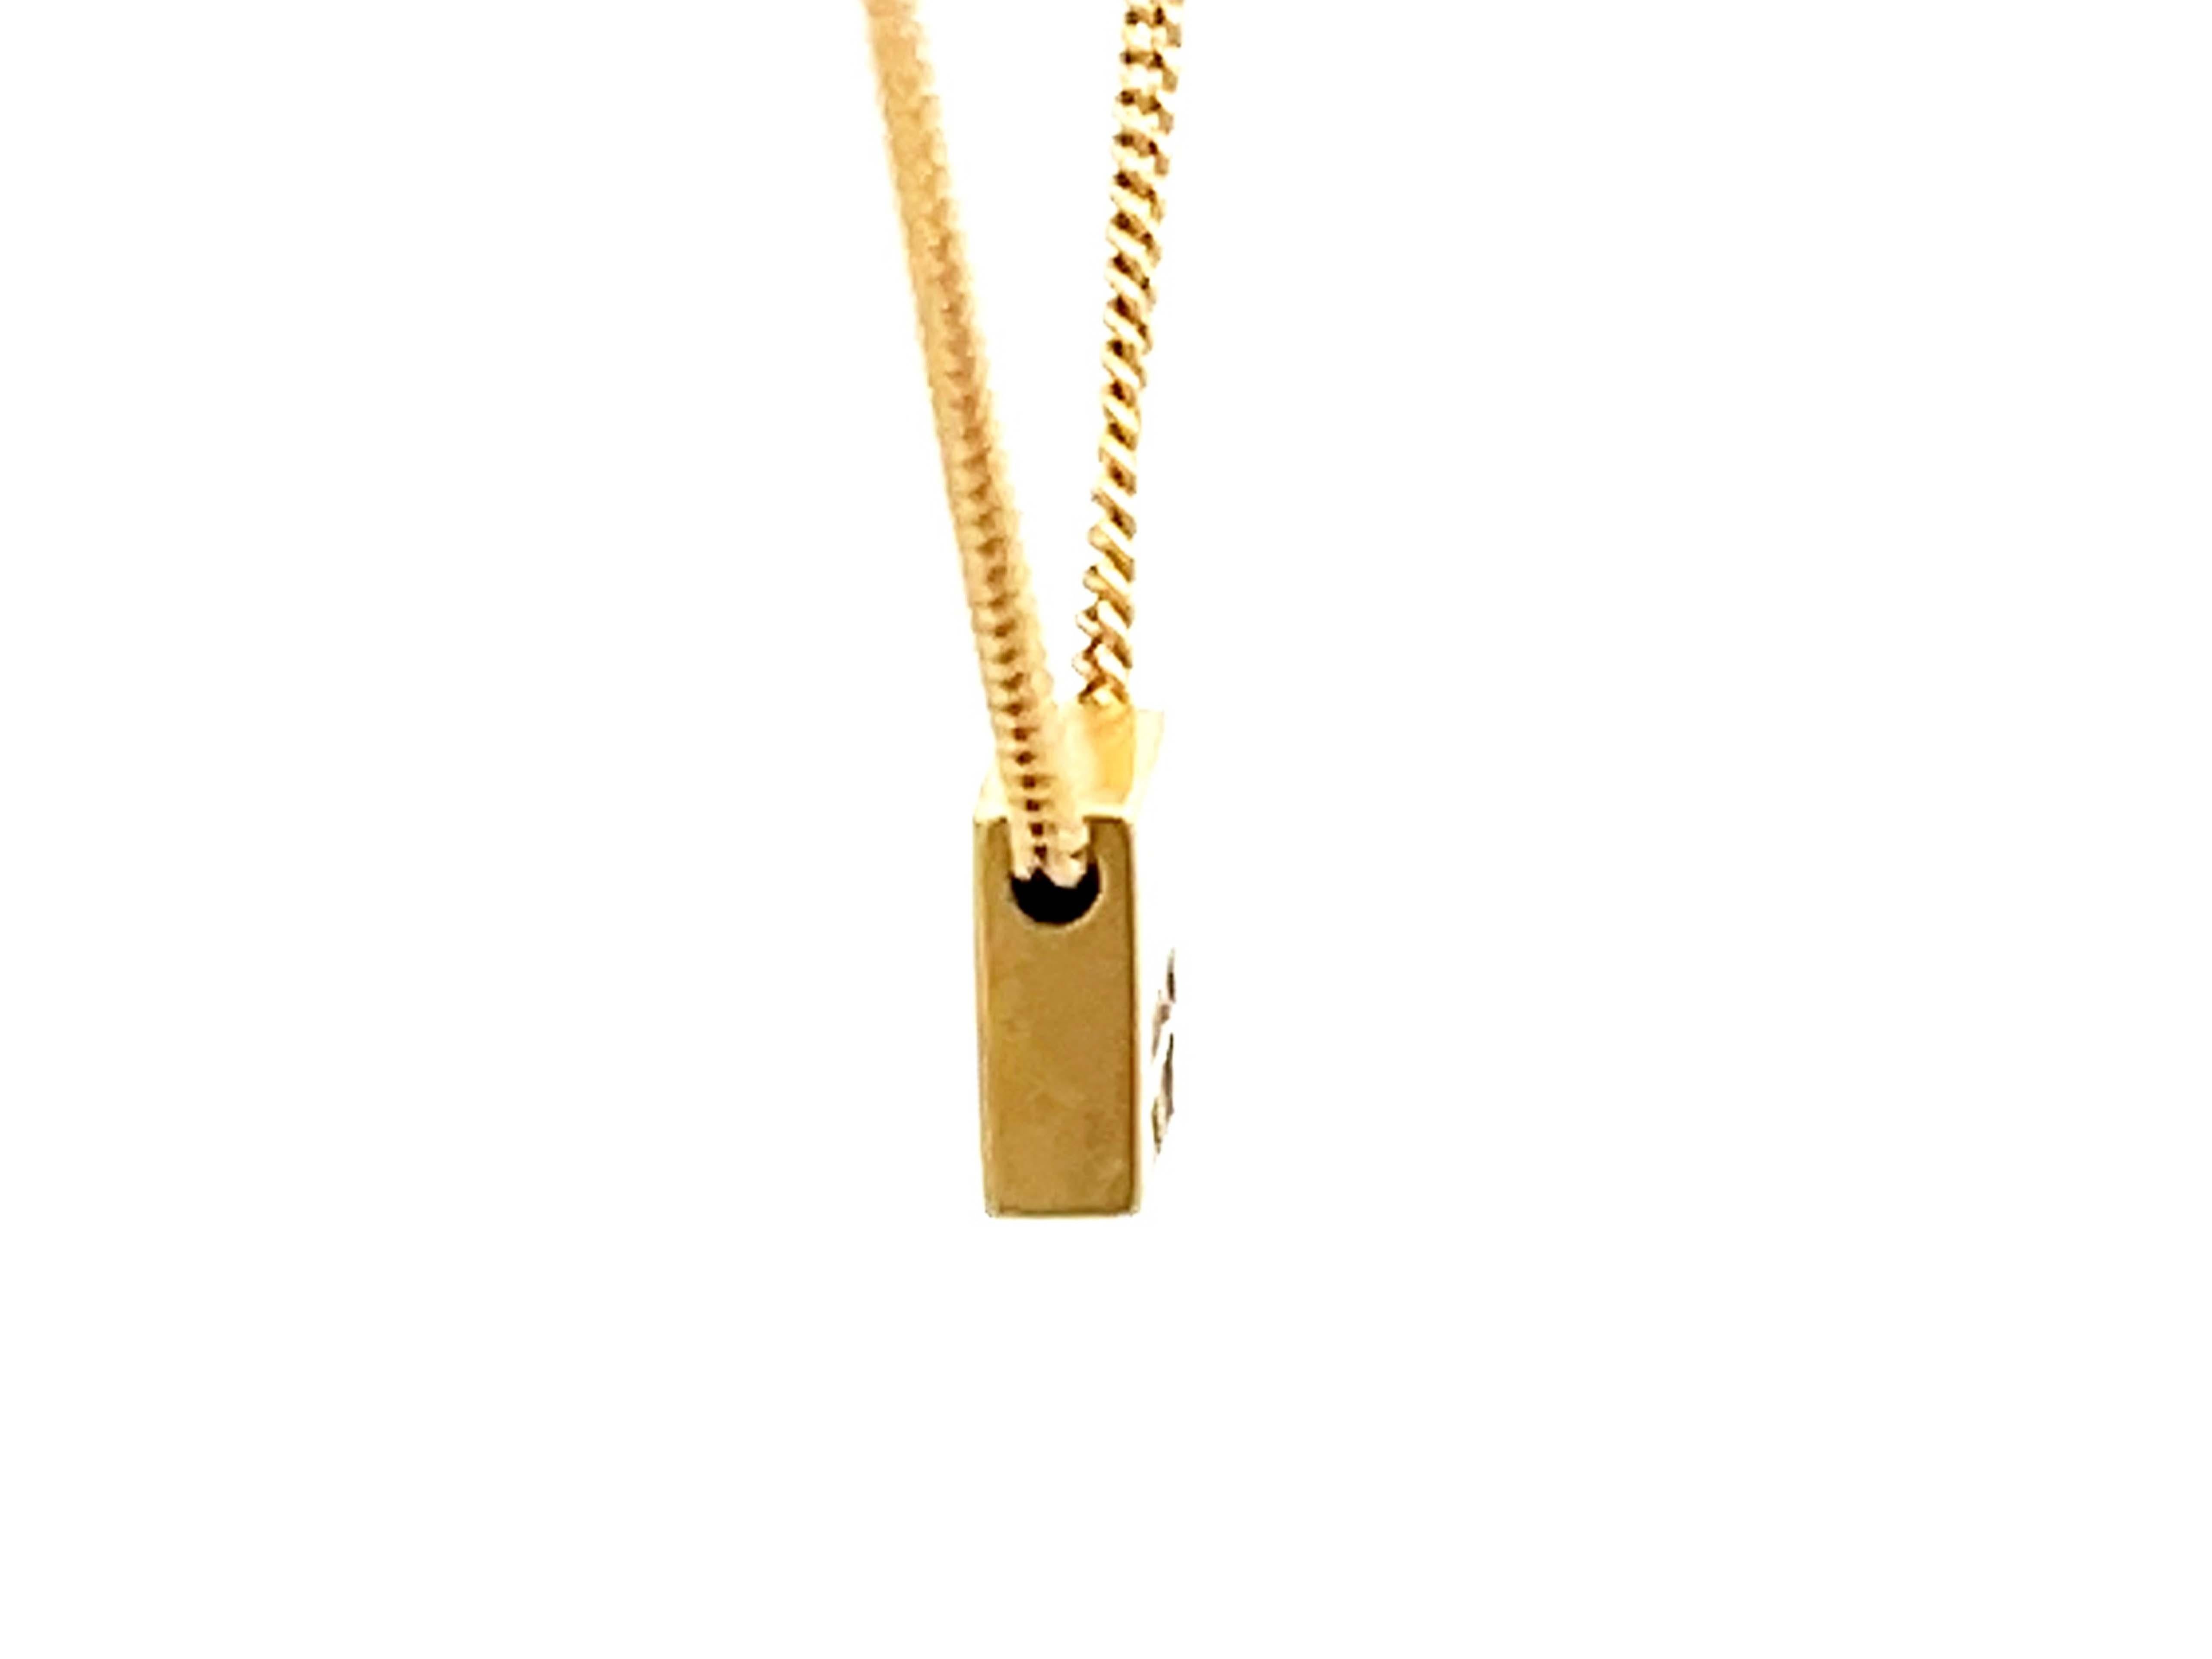 Small Square Single Diamond Necklace in 18k Yellow Gold In Excellent Condition For Sale In Honolulu, HI